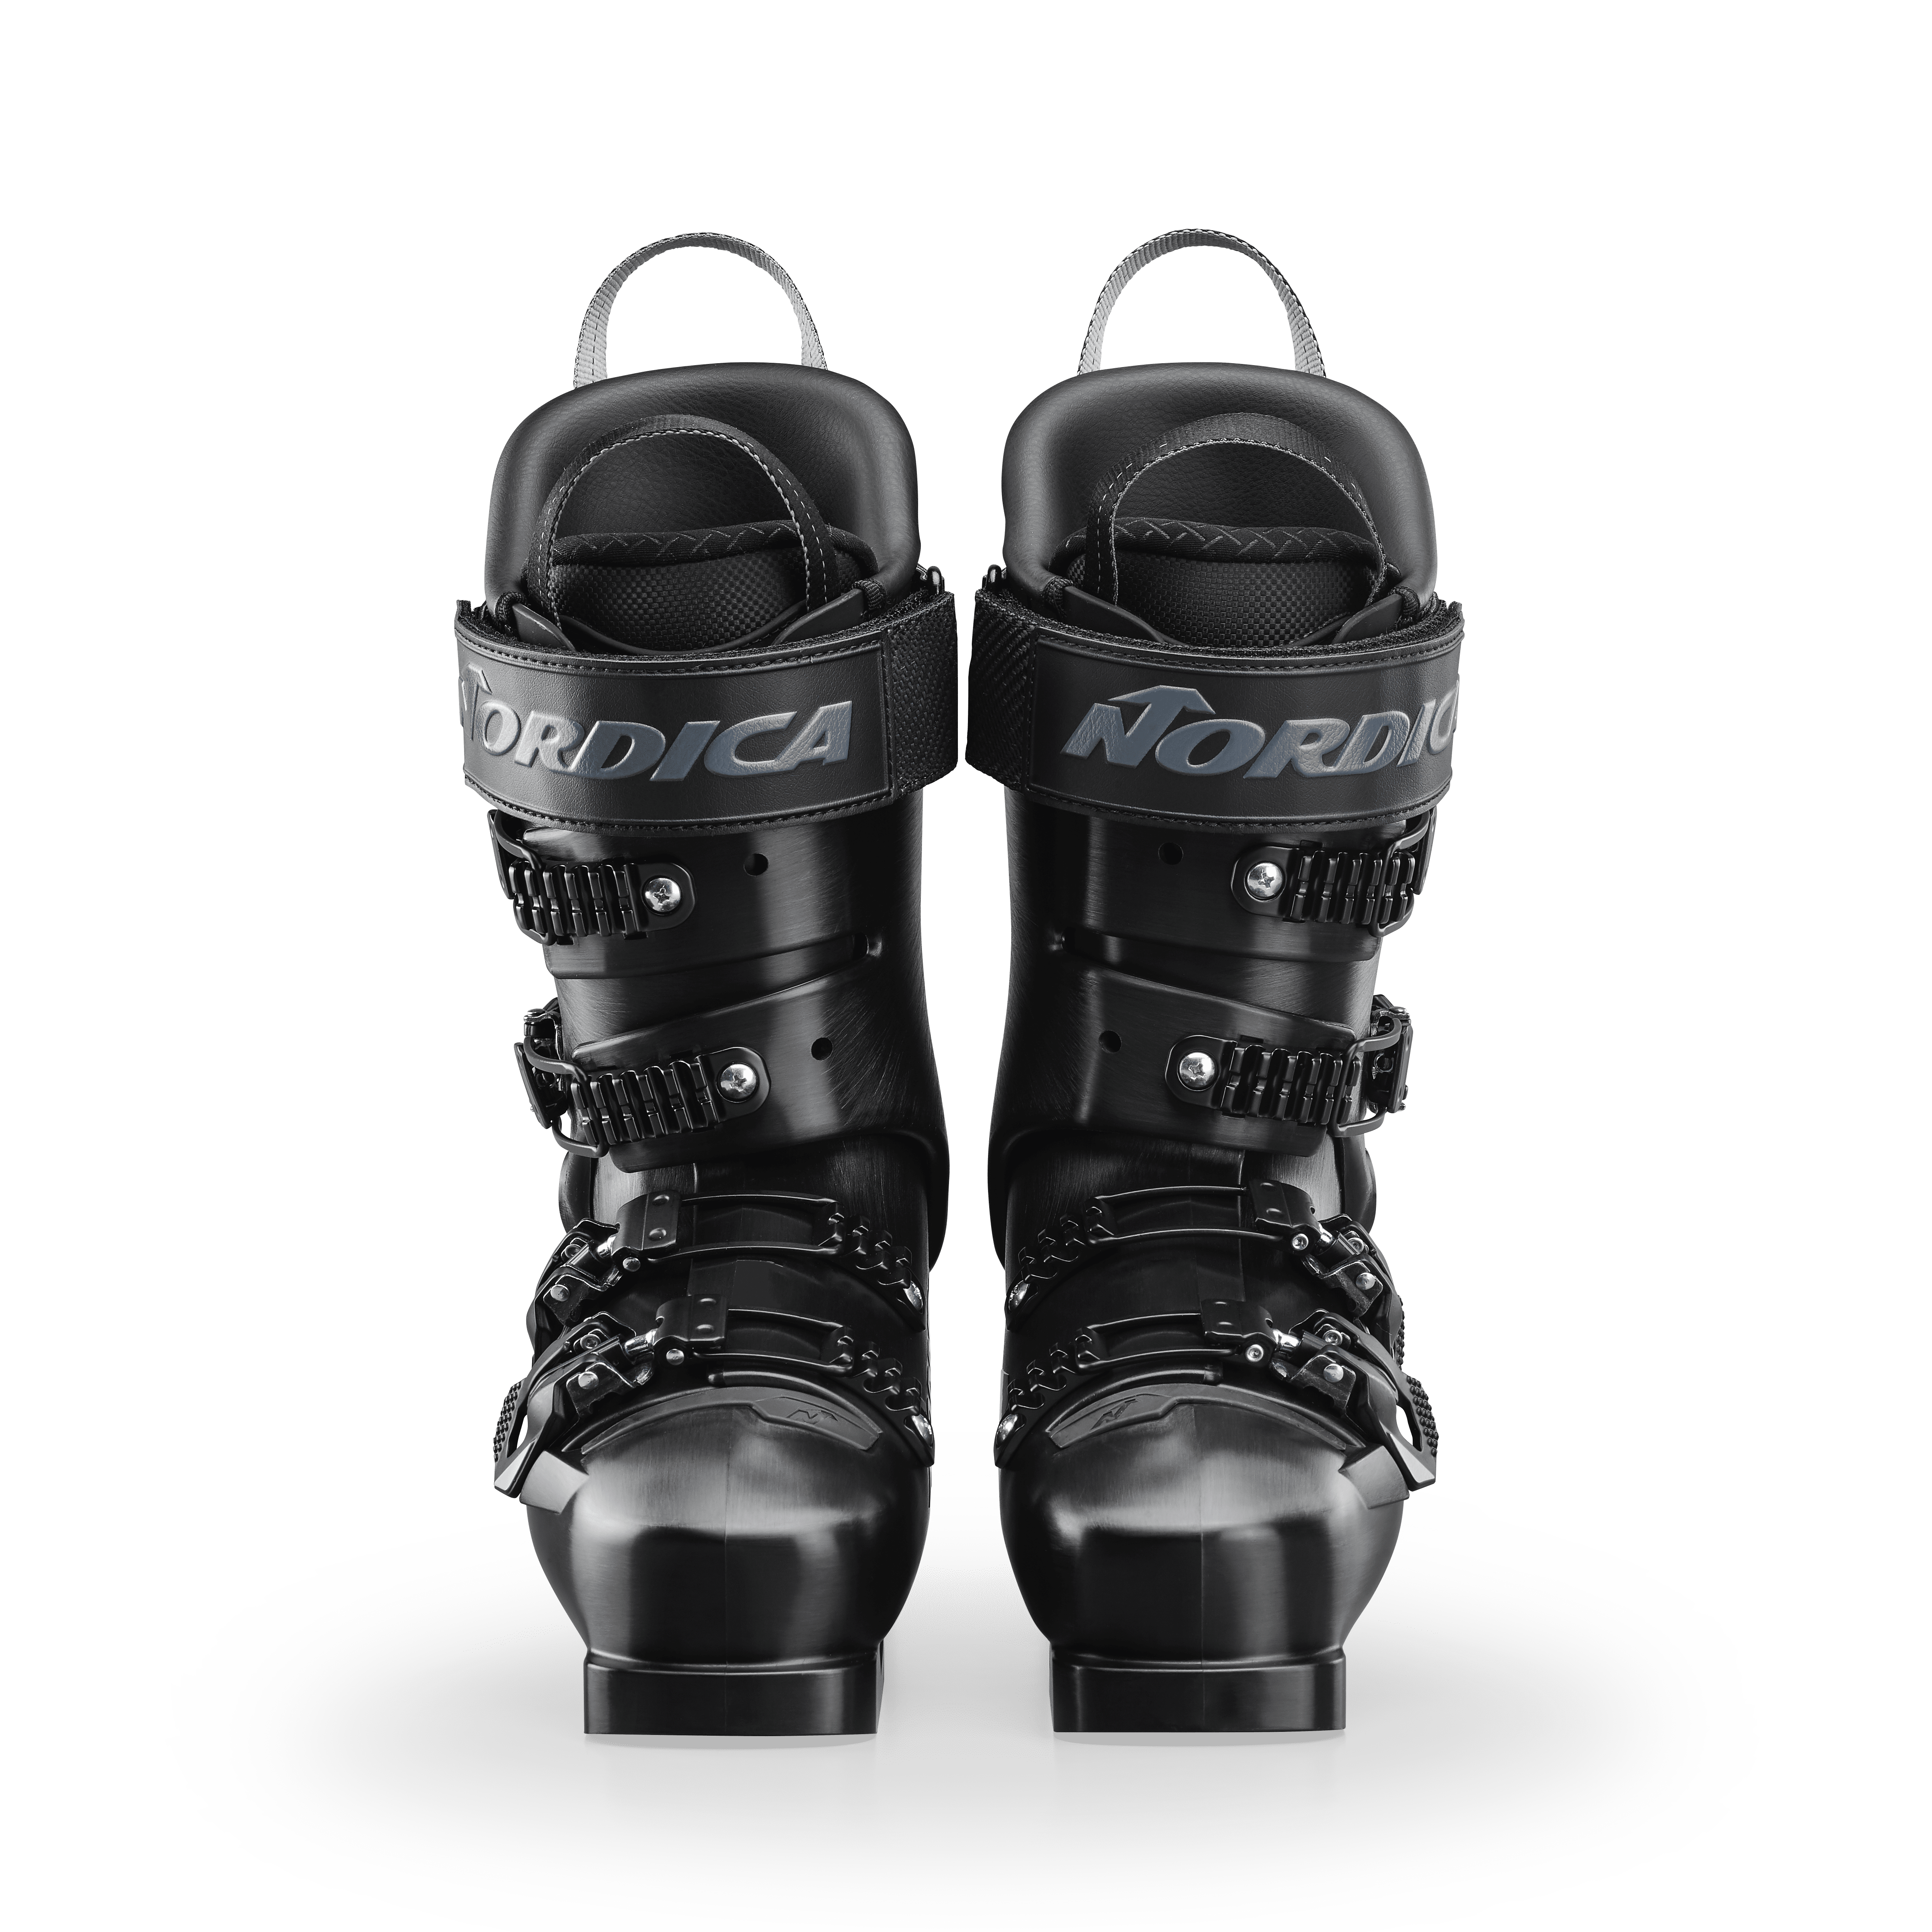 DOBERMANN 5 SOFT L.C. Nordica - Skis and Boots – Official website